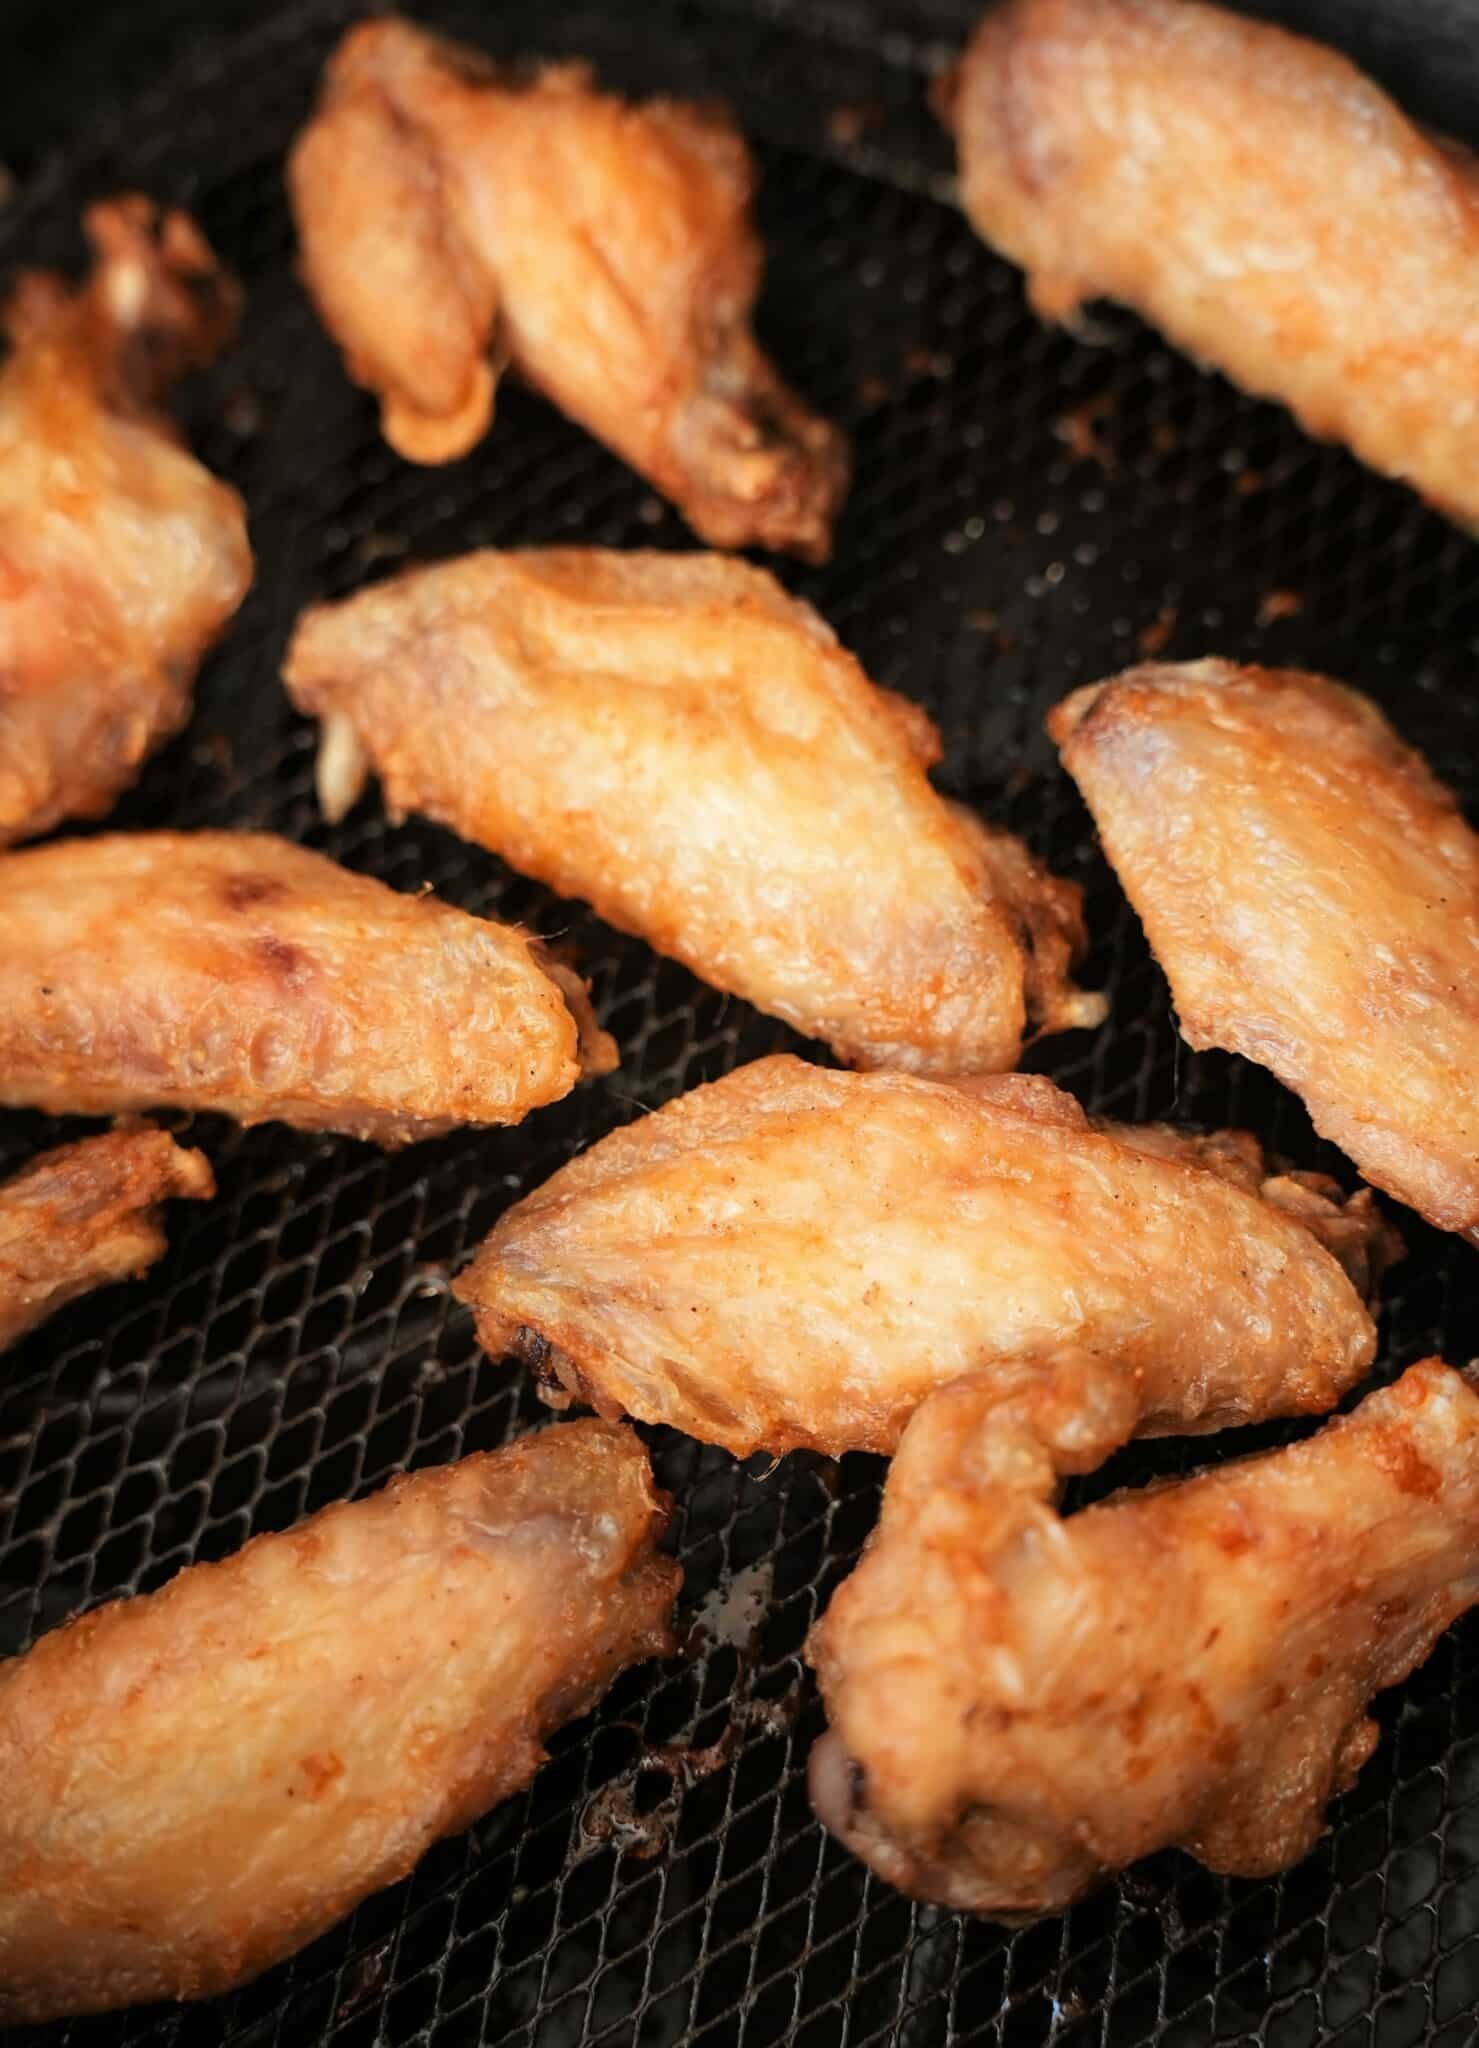 https://cjeatsrecipes.com/wp-content/uploads/2022/09/Air-Fryer-Chicken-Wings-Cooked-In-Air-Fryer-scaled.jpg